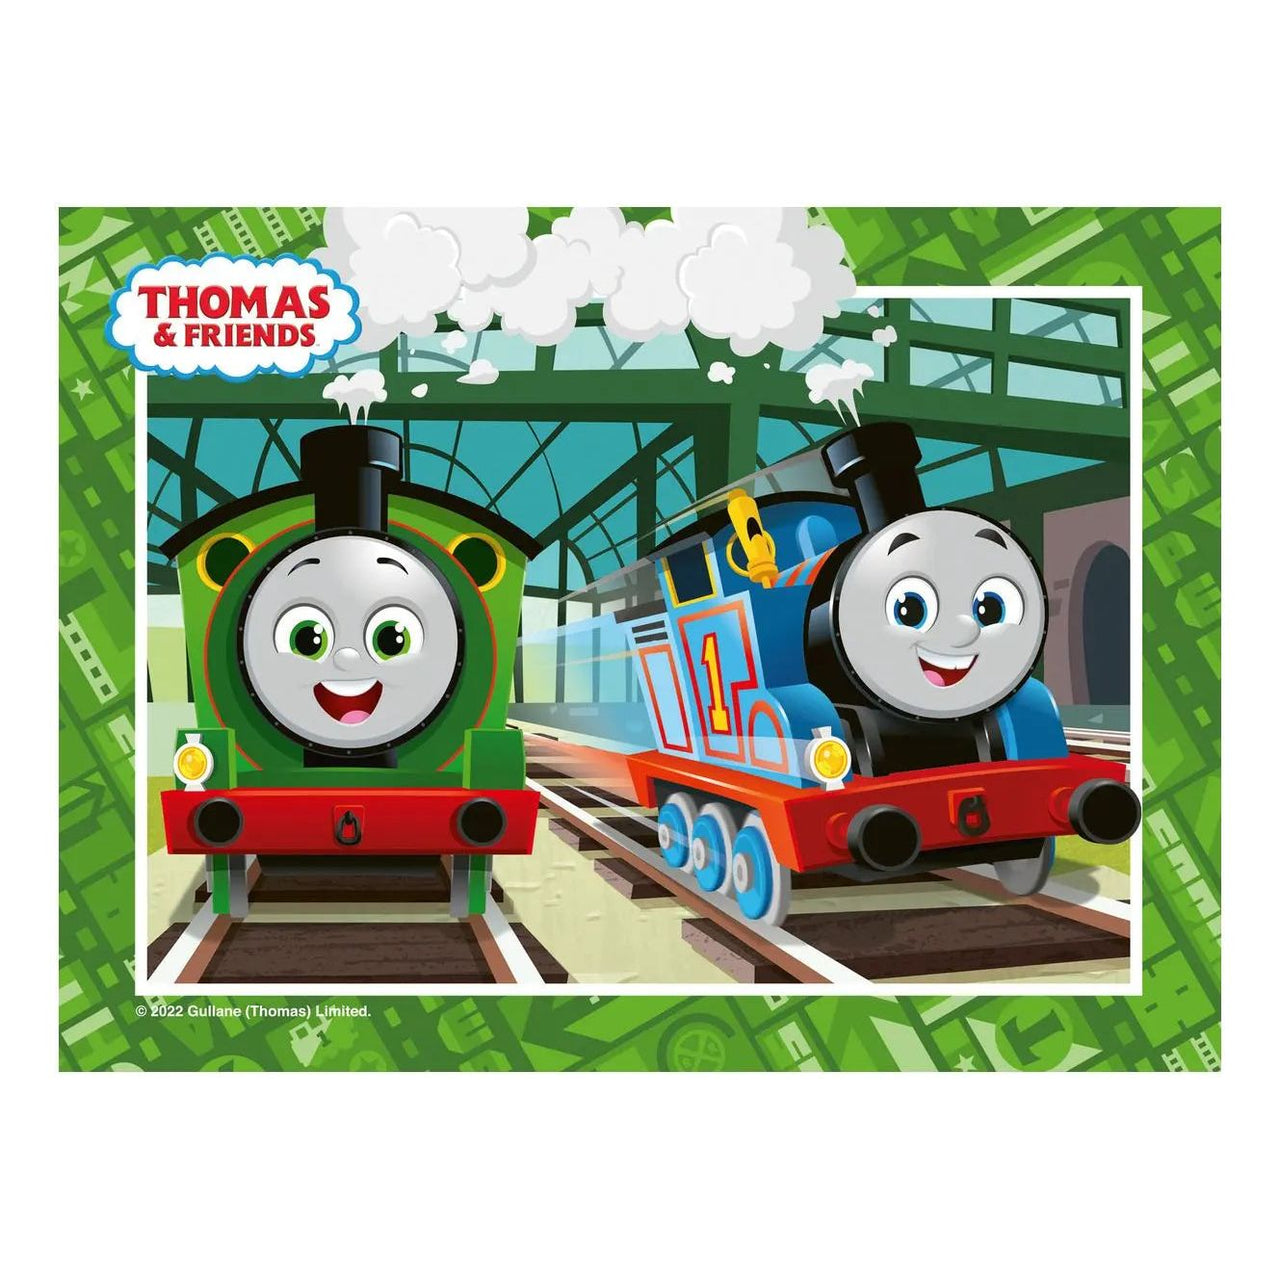 Thomas & Friends Fun Day Out 4 in a Box Jigsaw Puzzle Ravensburger